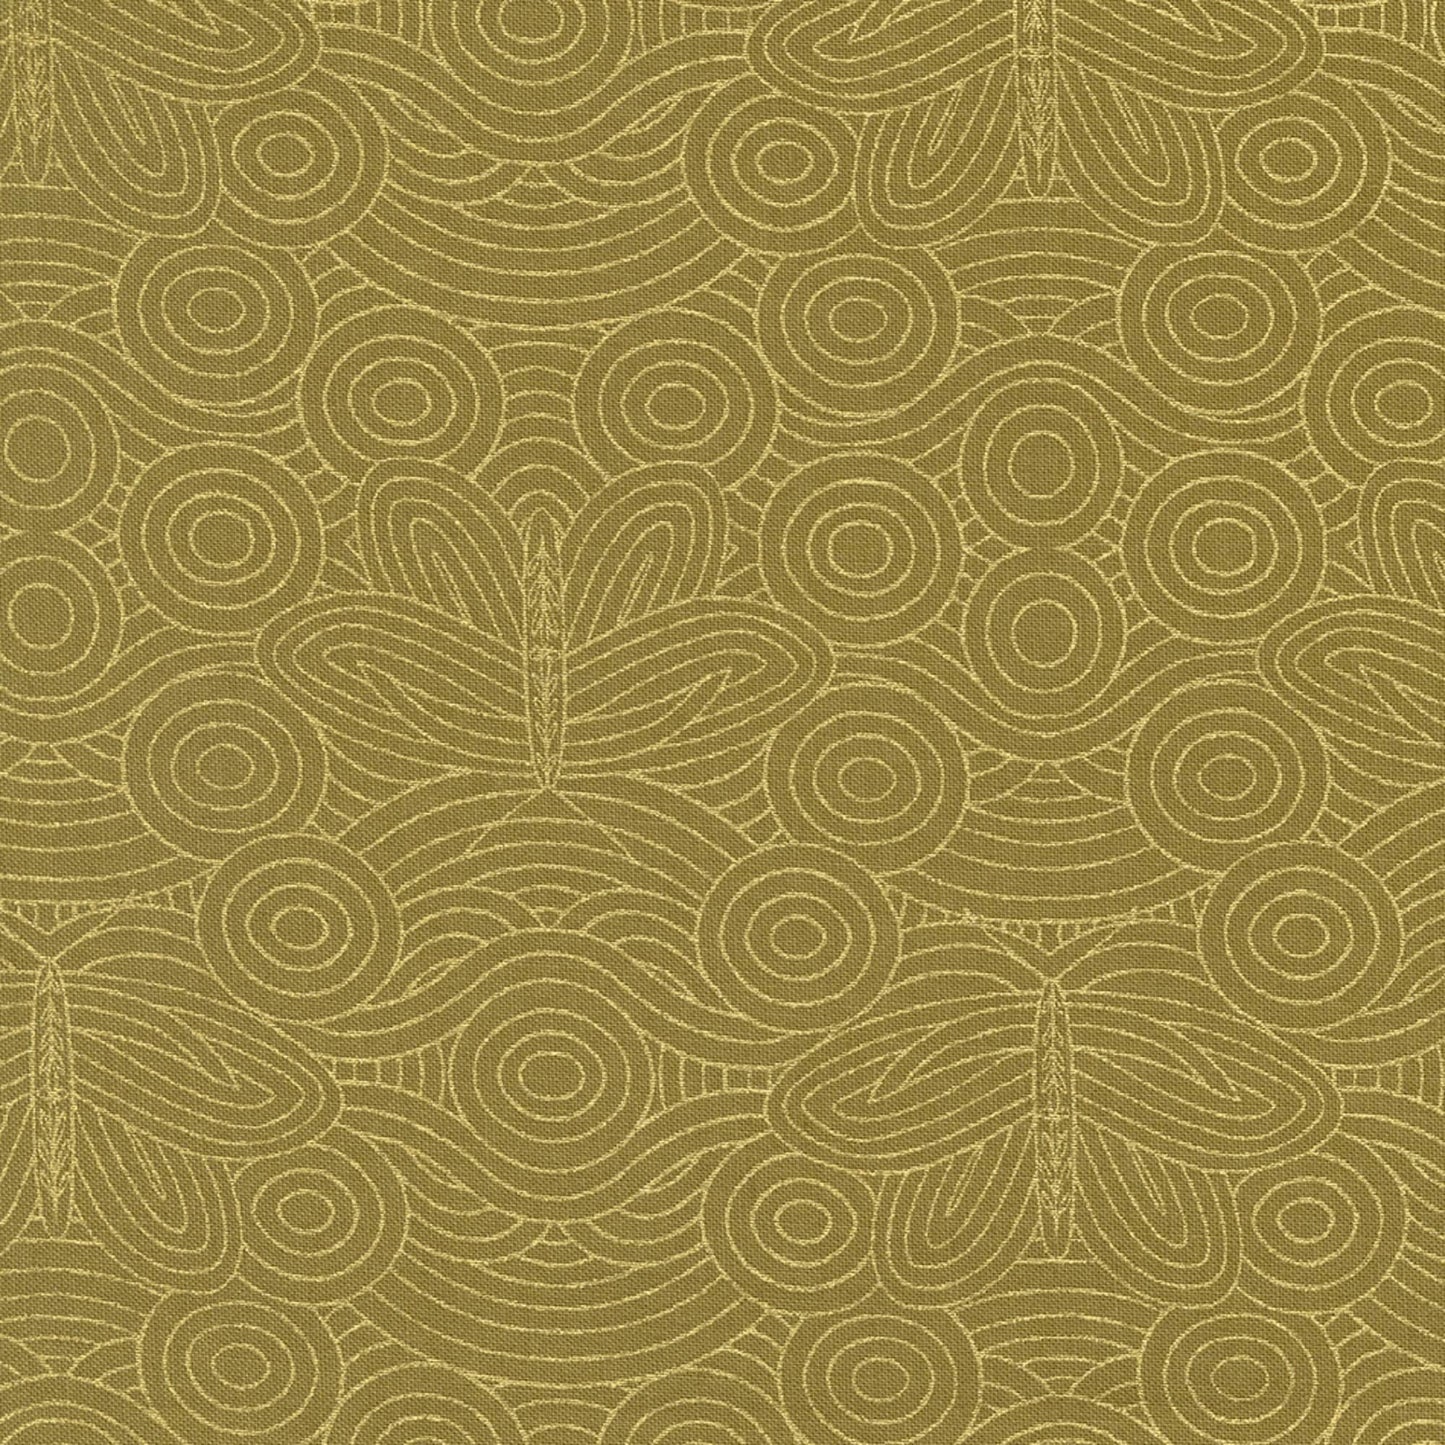 Butterfly in the Sky Ochre Gold METALLIC Meadowmere Gingiber Moda 100% Quilters Cotton Fabric Fetish